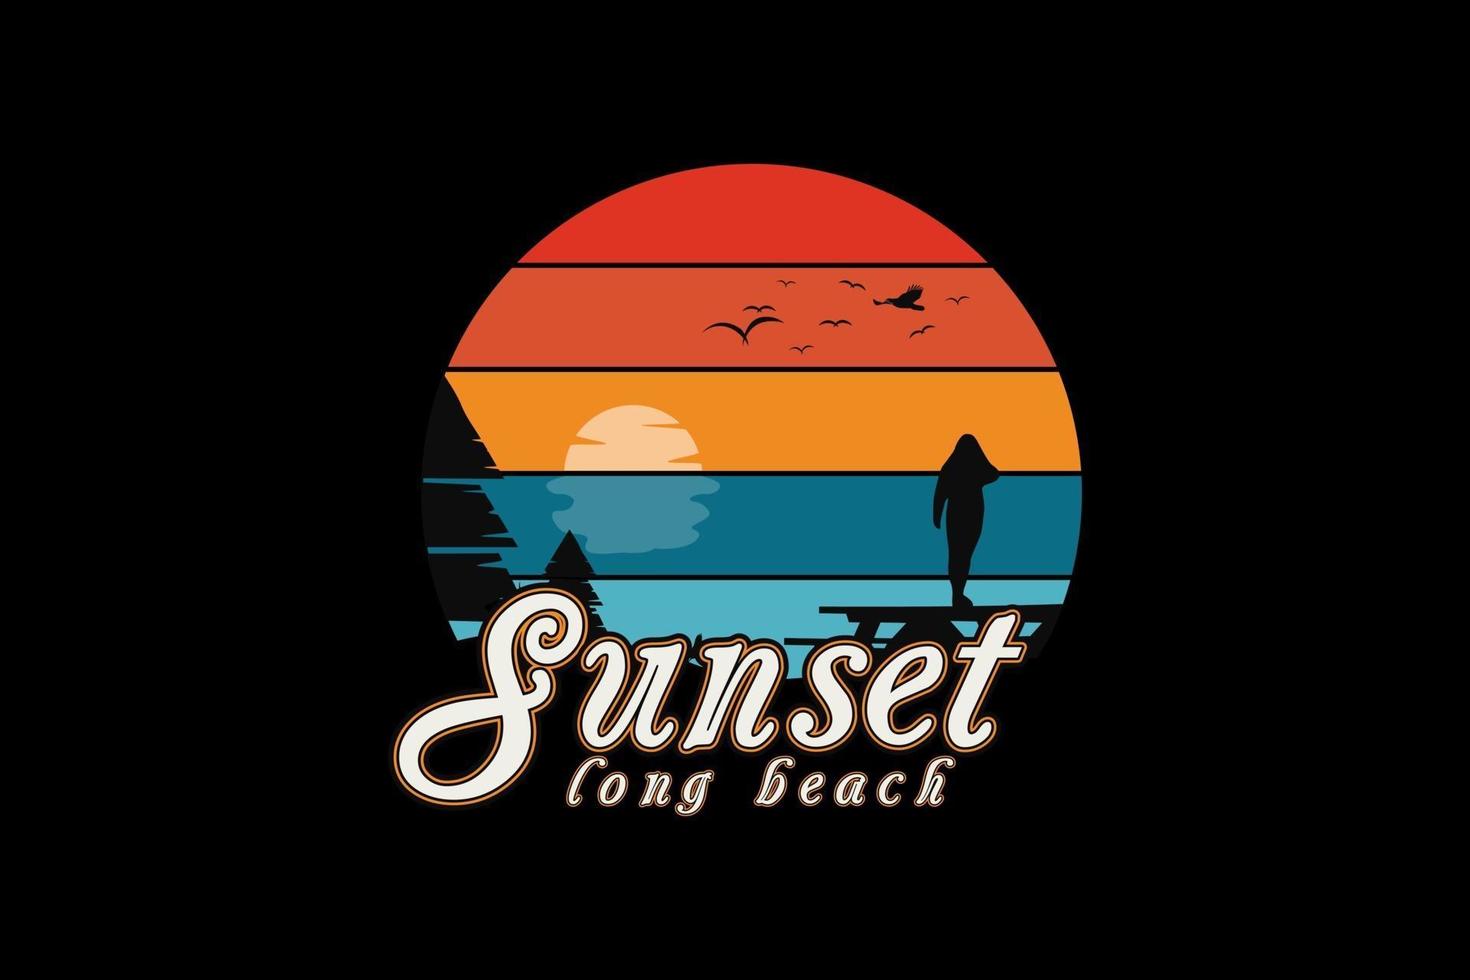 Sunset long beach,retro vintage style hand drawing illustration vector